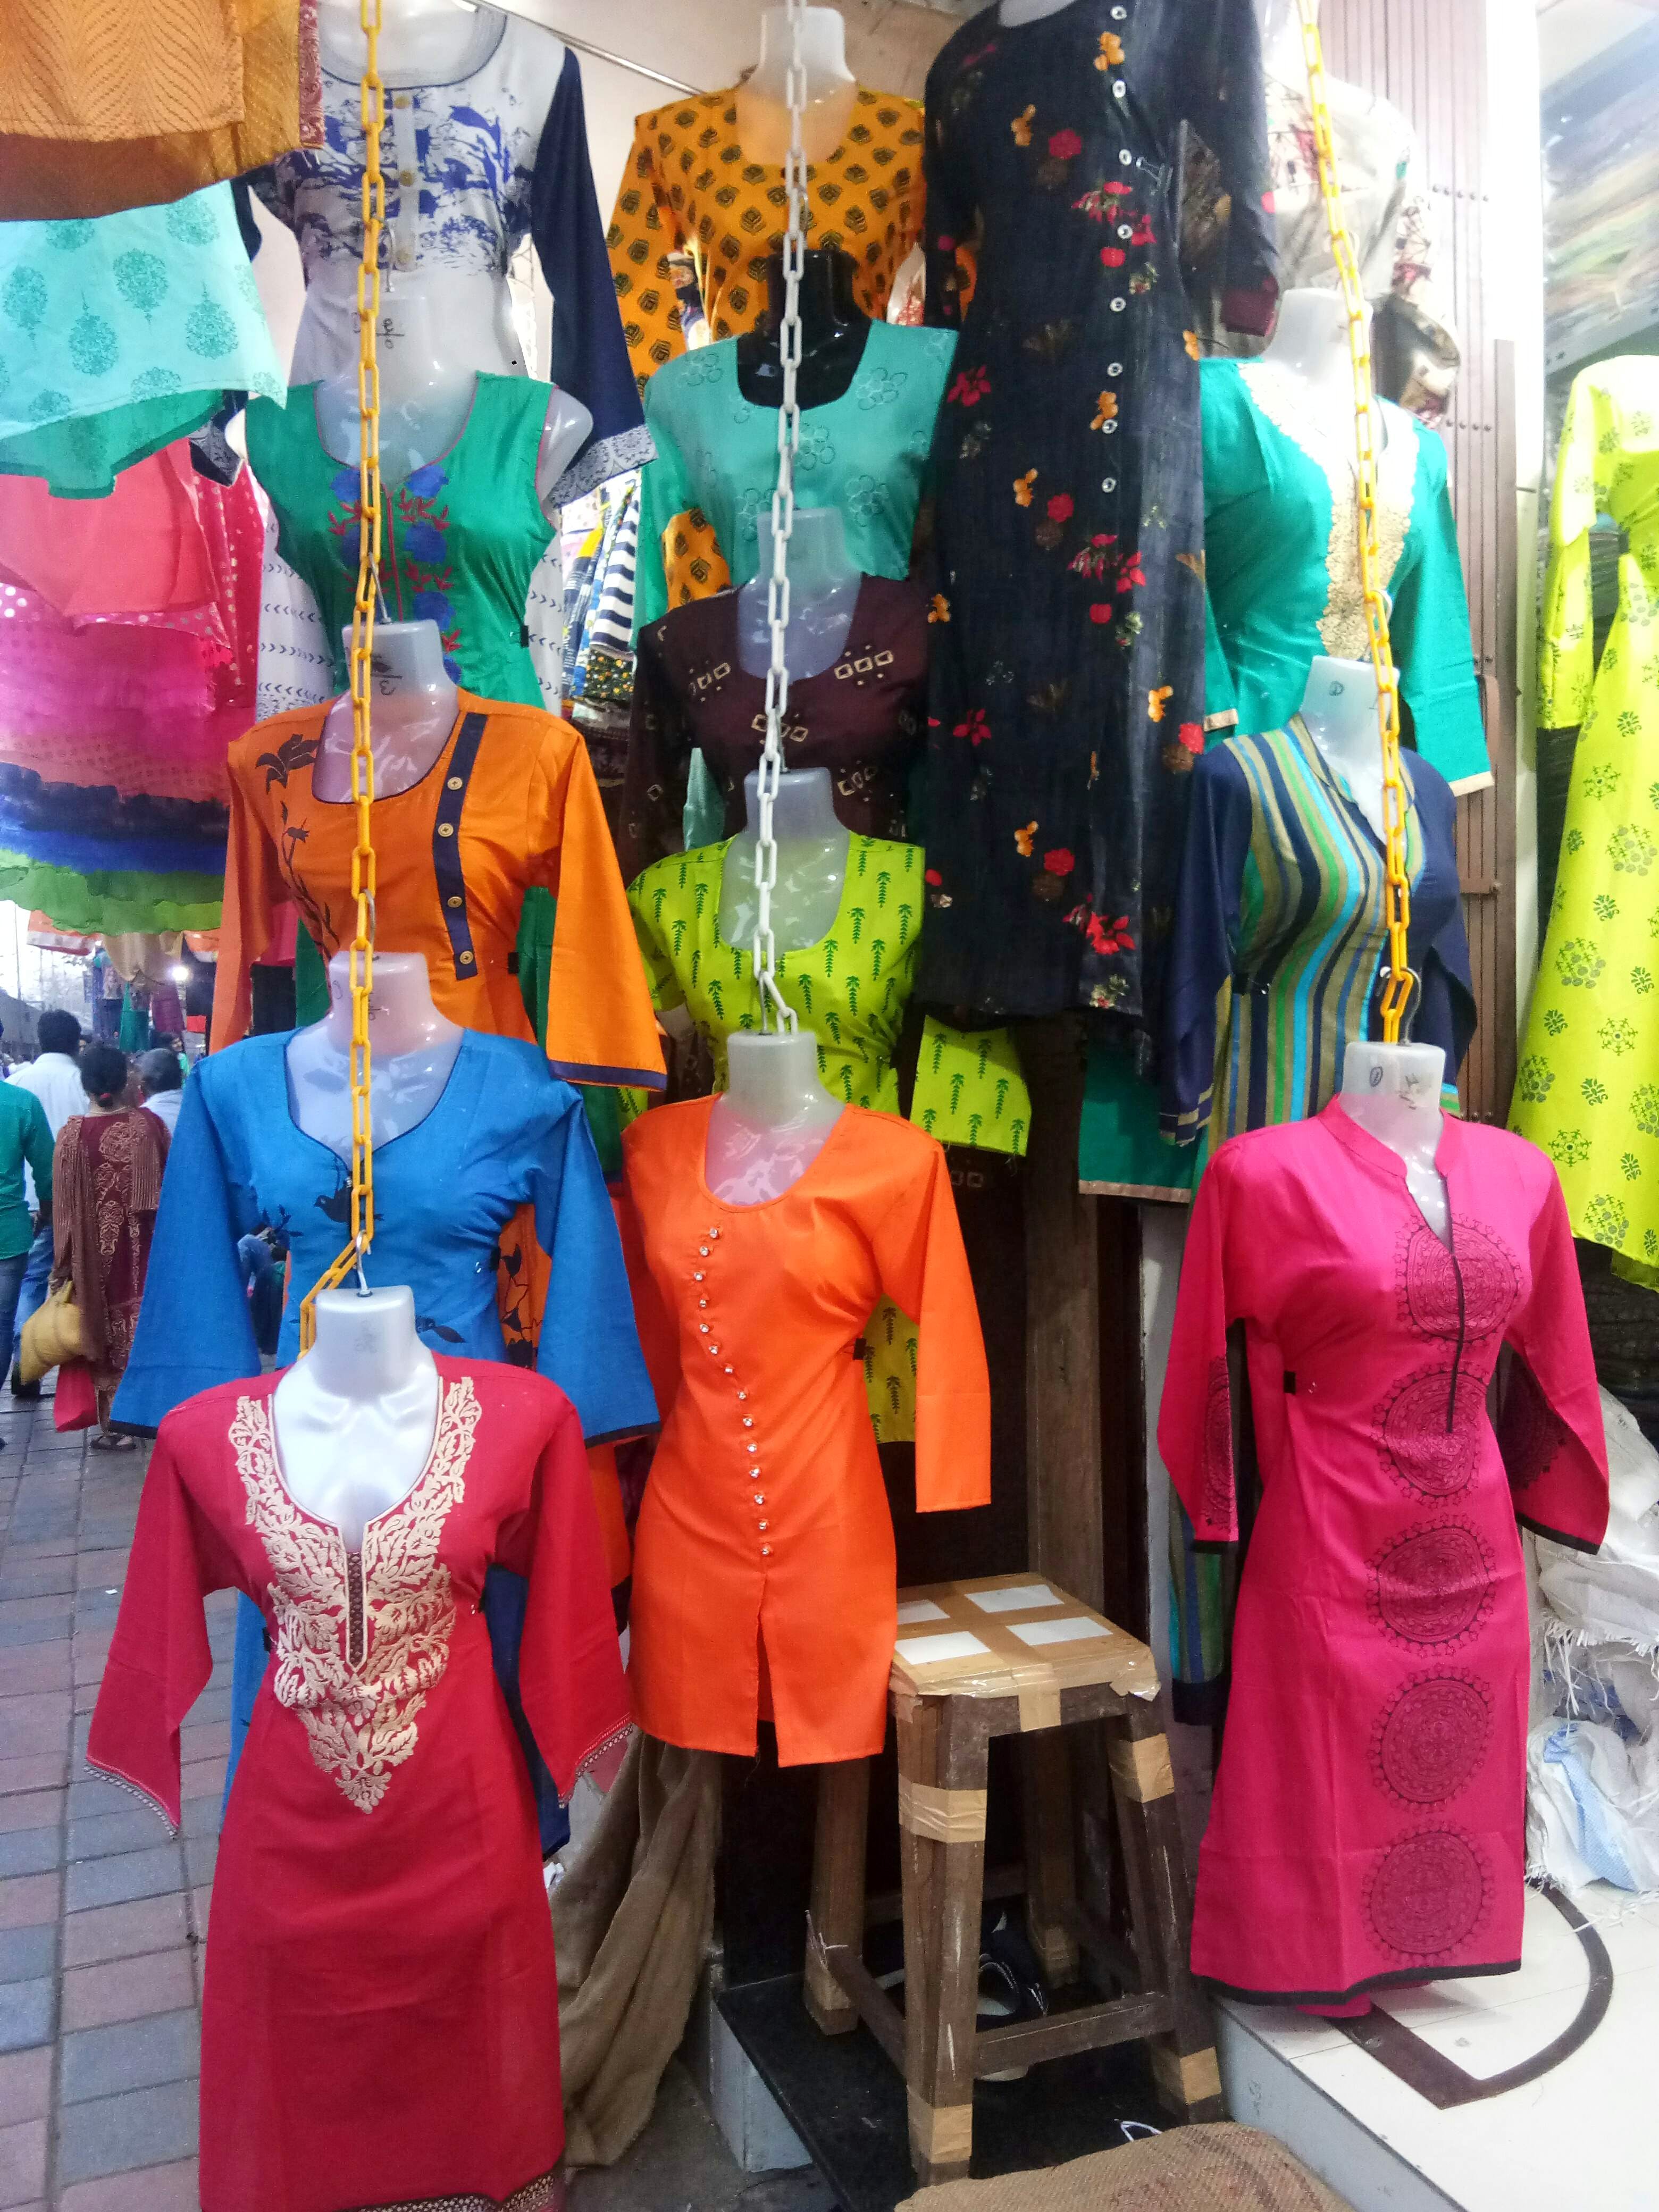 Bazaar,Public space,Selling,Display window,Retail,Market,Temple,Mannequin,Textile,Shopping